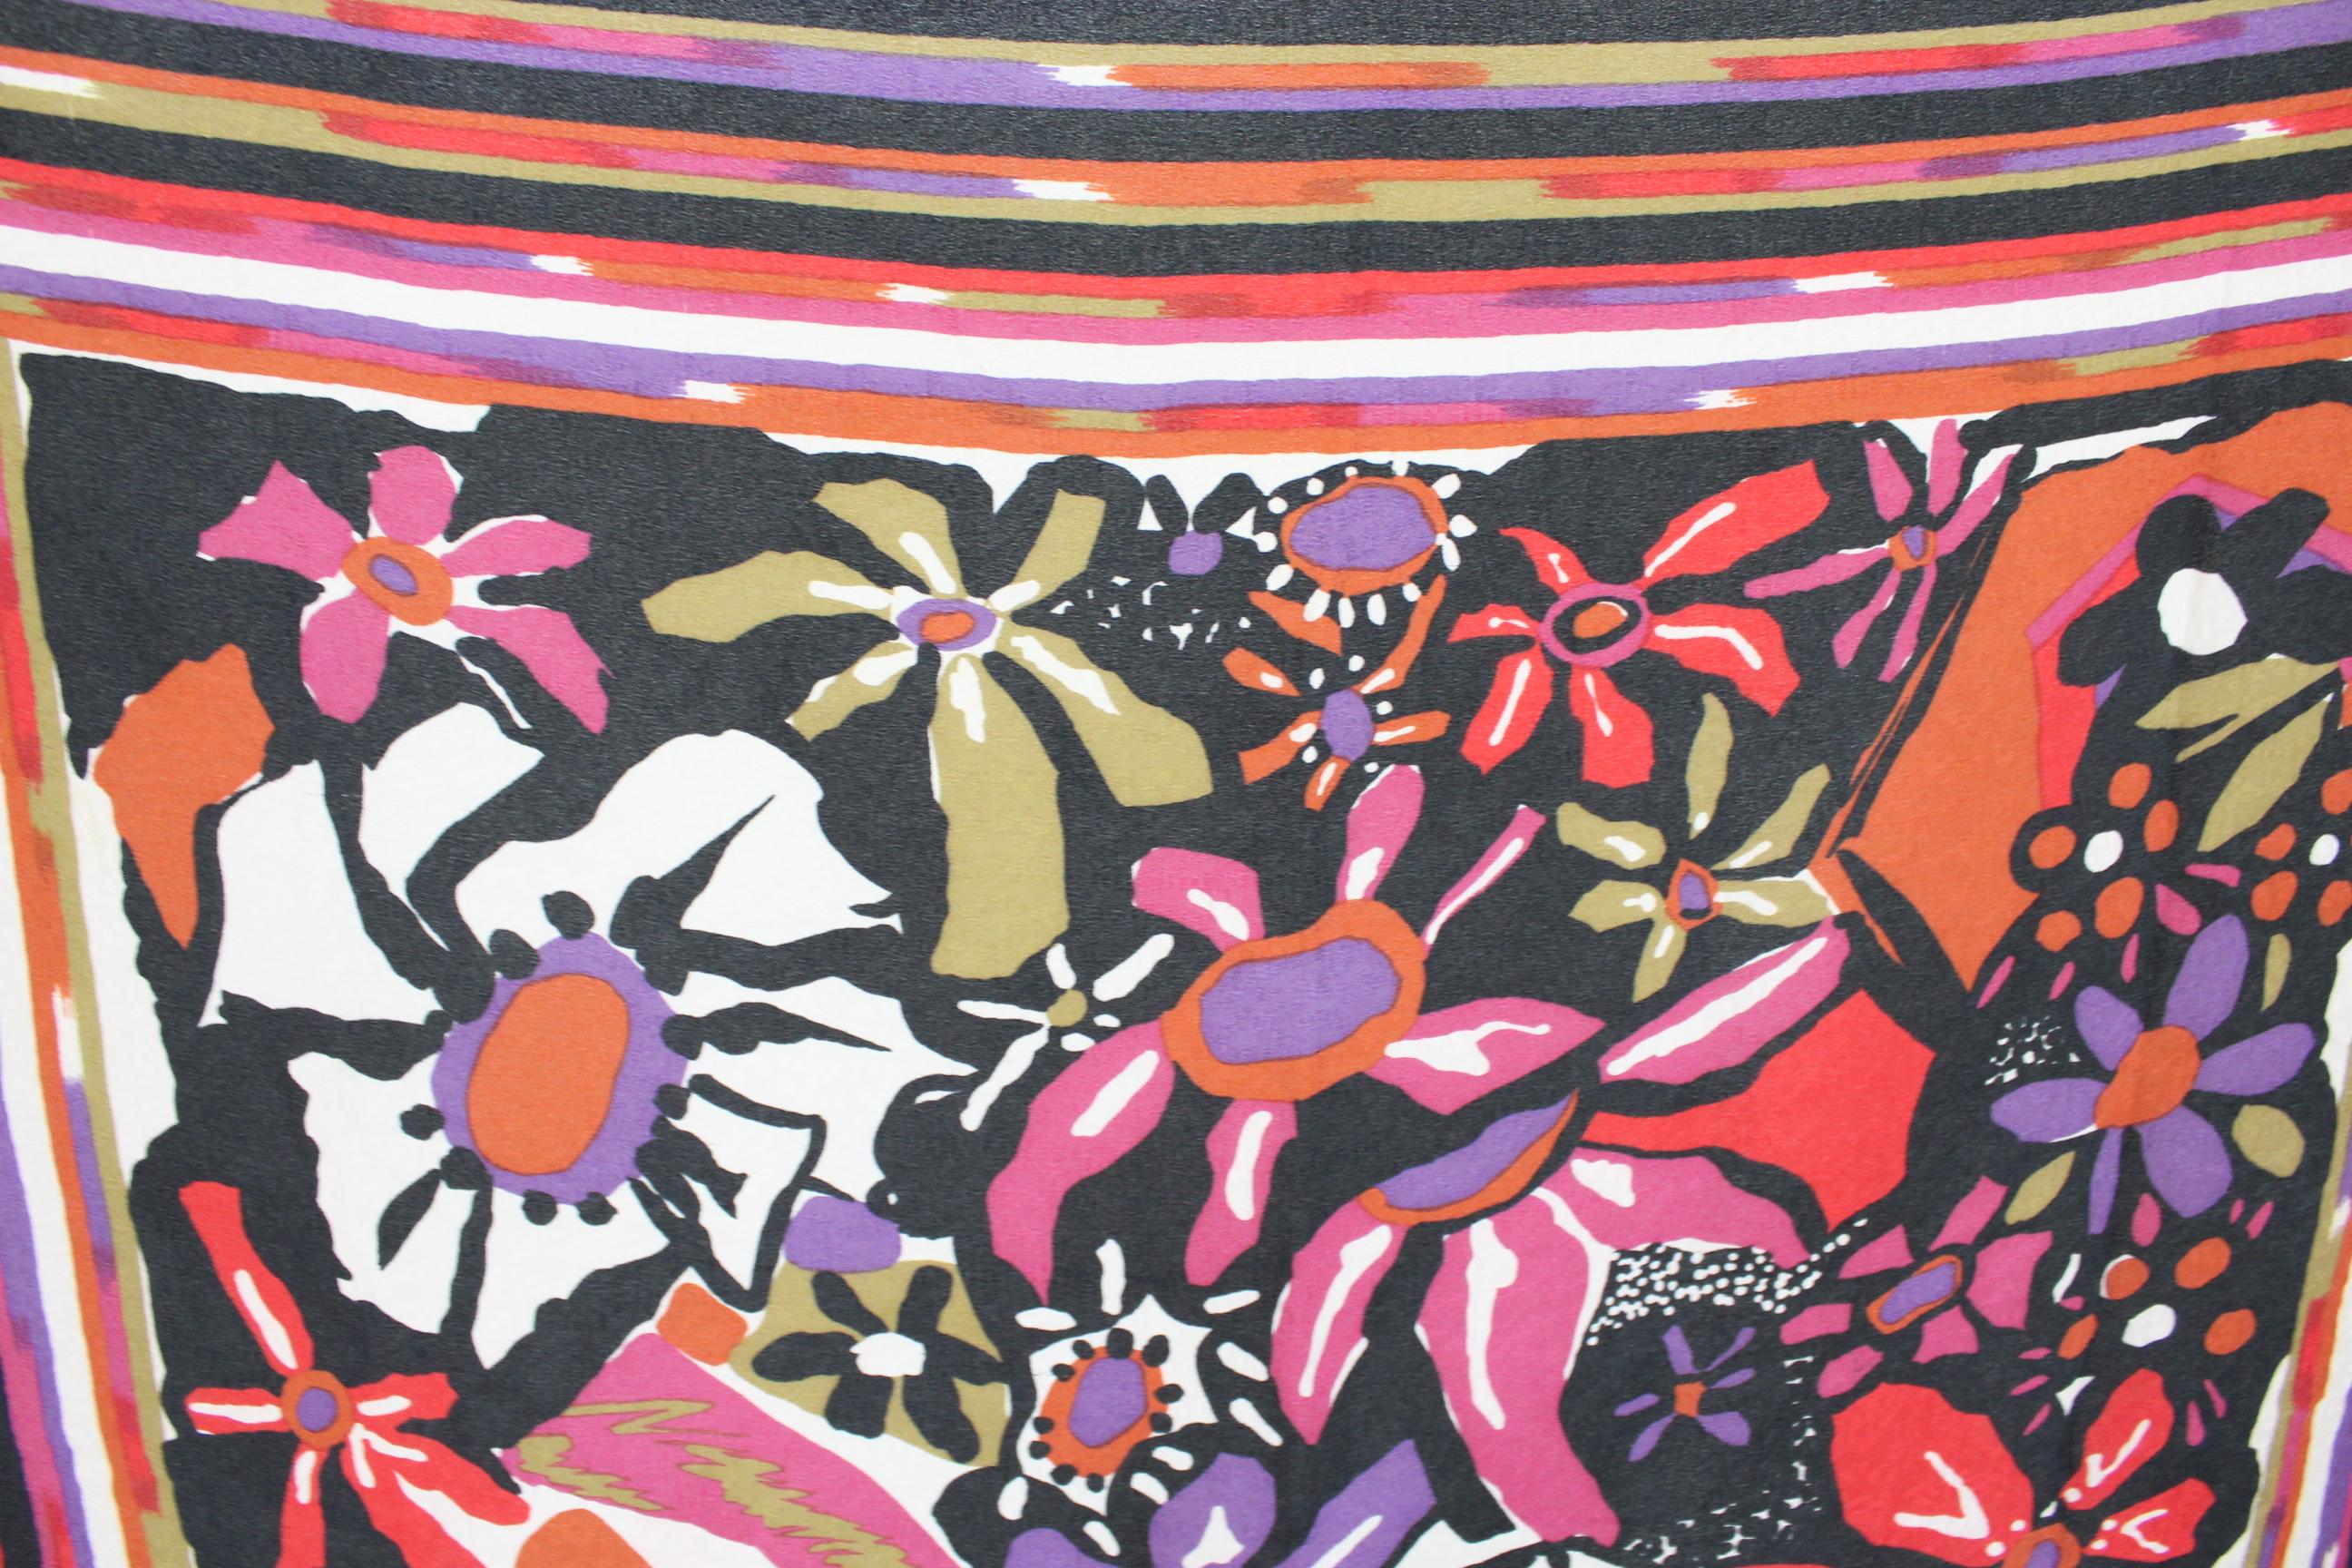 Missoni vintage 90s scarf. Designs of flowers in a multicolored striped frame. 100% silk. Made in Italy. Excellent vintage conditions.

Measures: 88 x 88 cm